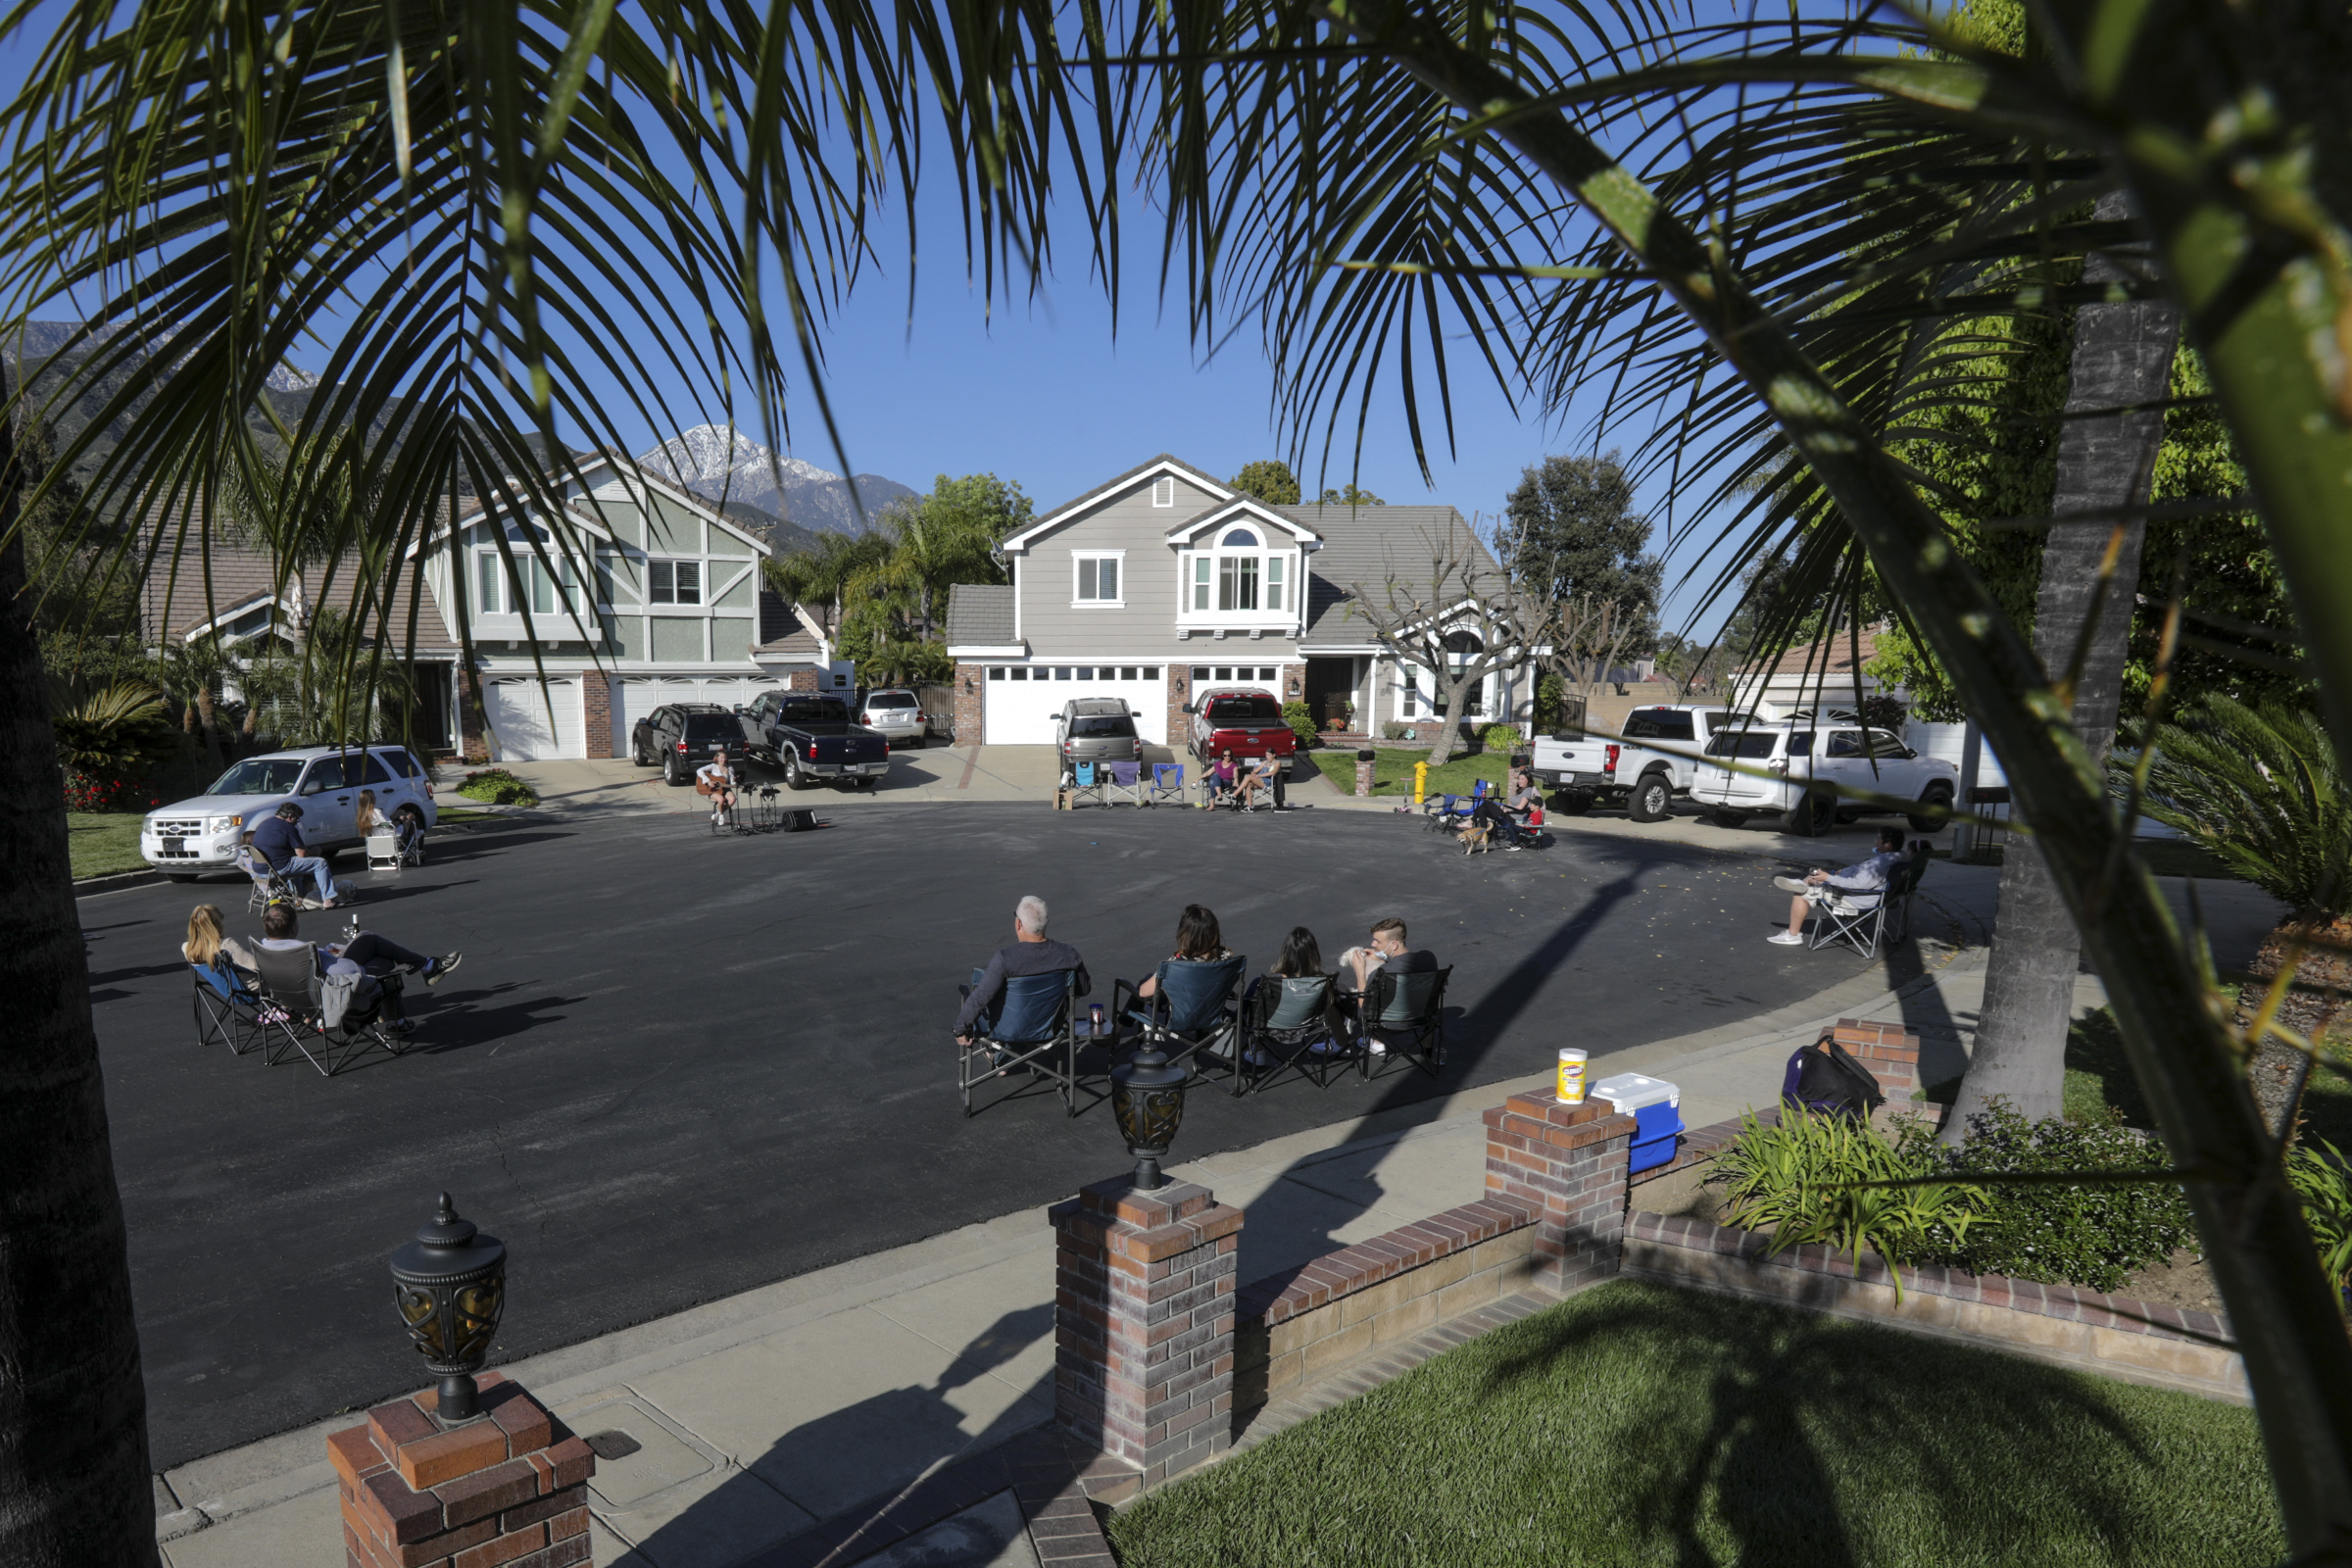 PHOTO: Neighbors living in a culdesac of Upland got together and hold Neighborhood Safe Social Distancing gathering on weekly basis to keep the mood upbeat in the midst coronavirus pandemic.